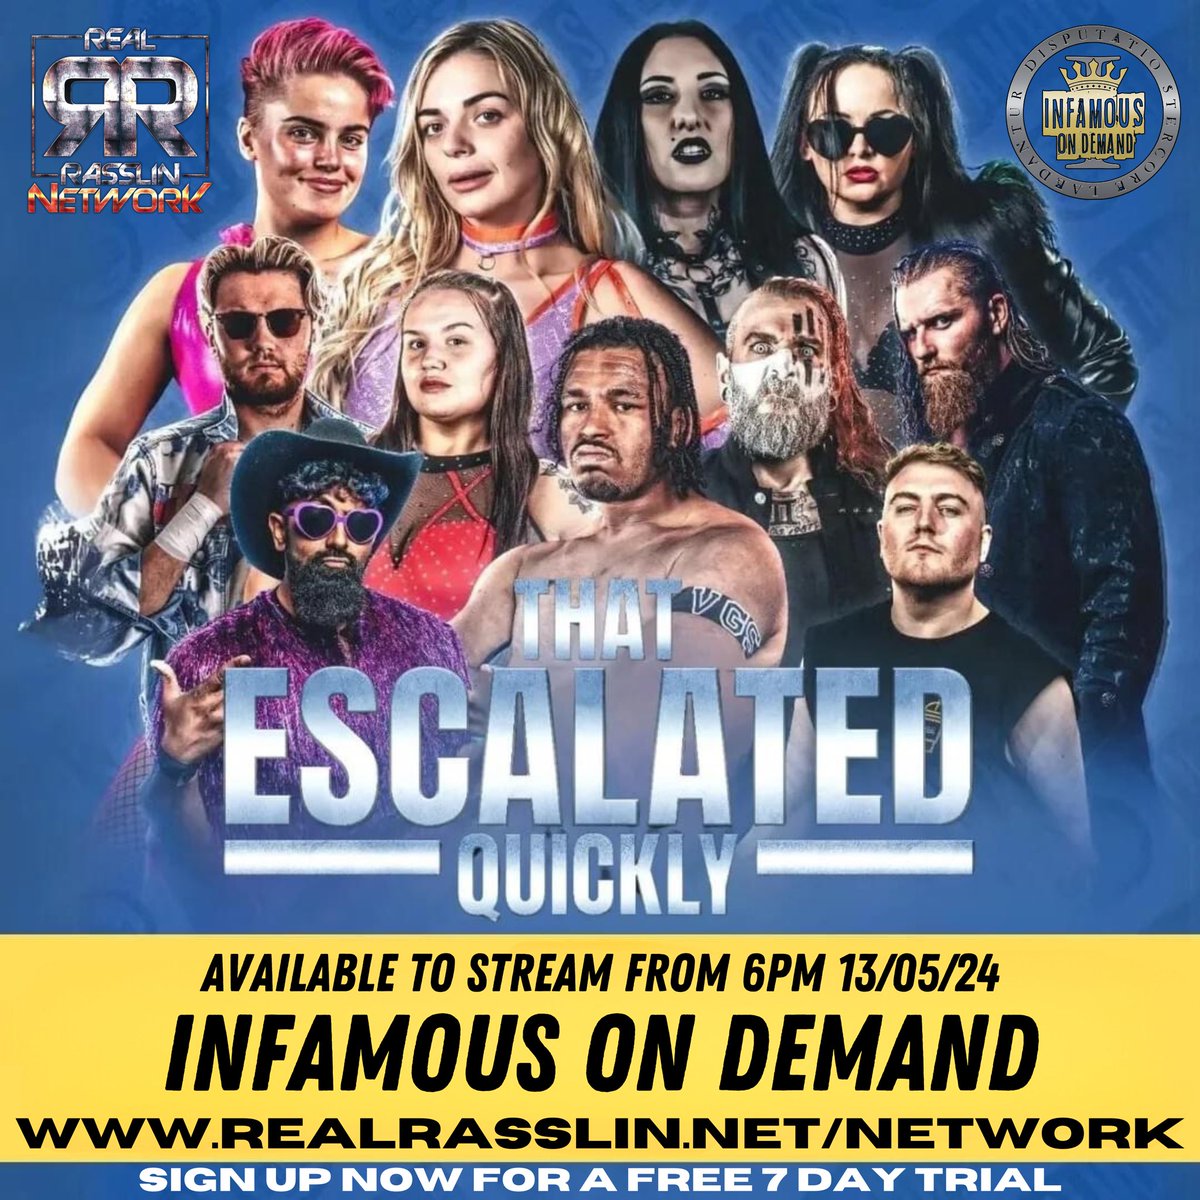 @INFAMOUS_WP Presents: THAT ESCALATED QUICKLY A New Champion Is Crowned! Available Tonight from 6pm on The Real Rasslin Network! RealRasslin.net/network #Wrestling #ThatEscalatedQuickly #Infamous #TheRealRasslinNetwork